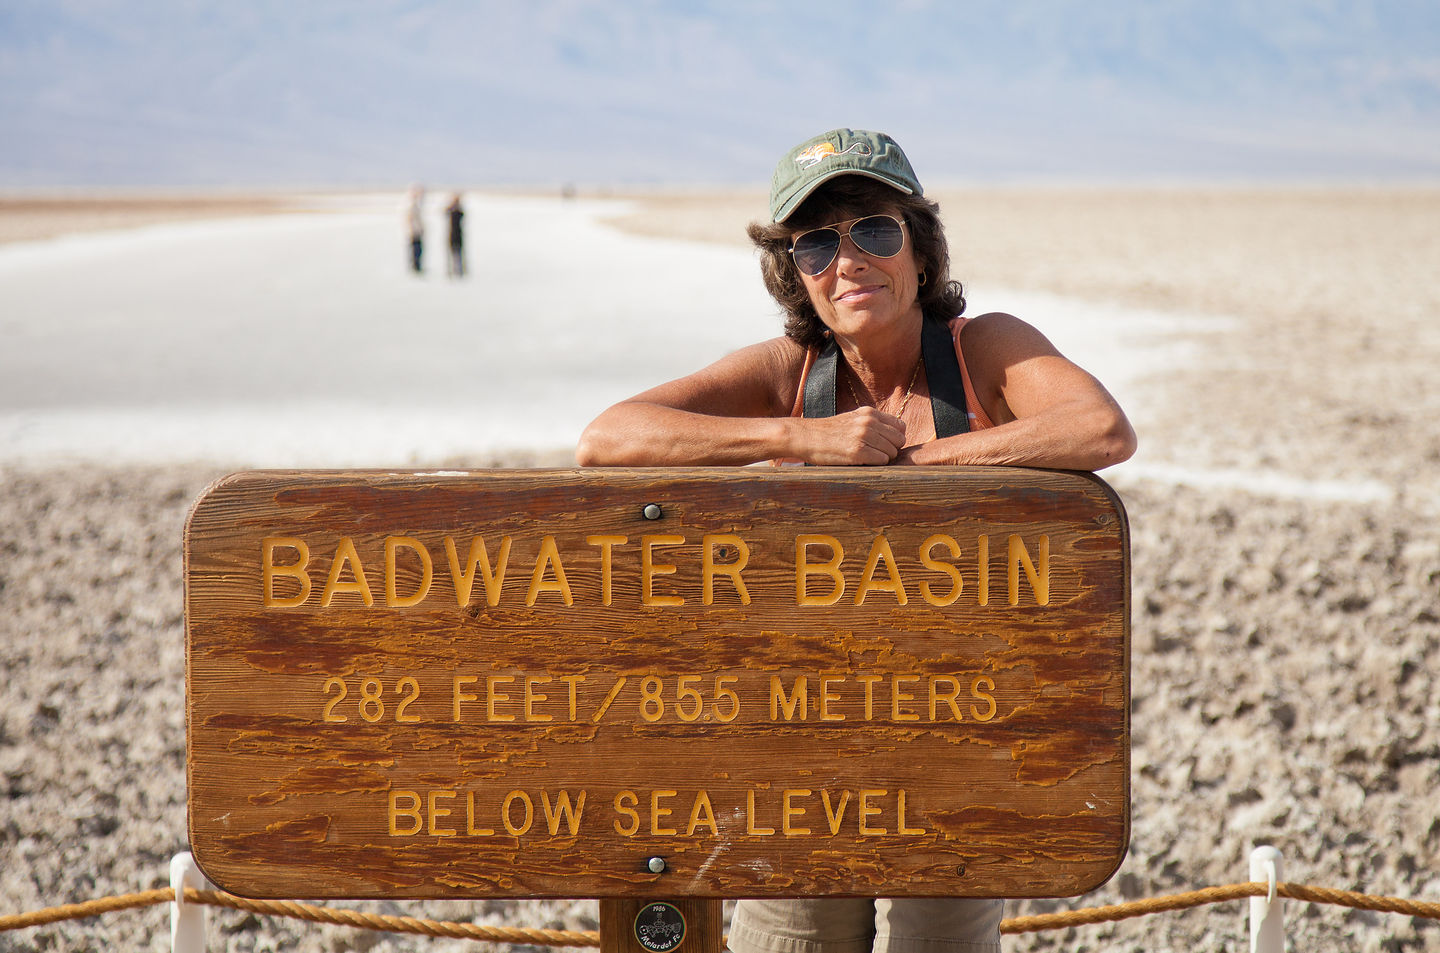 Lolo with Badwater Basin Sign